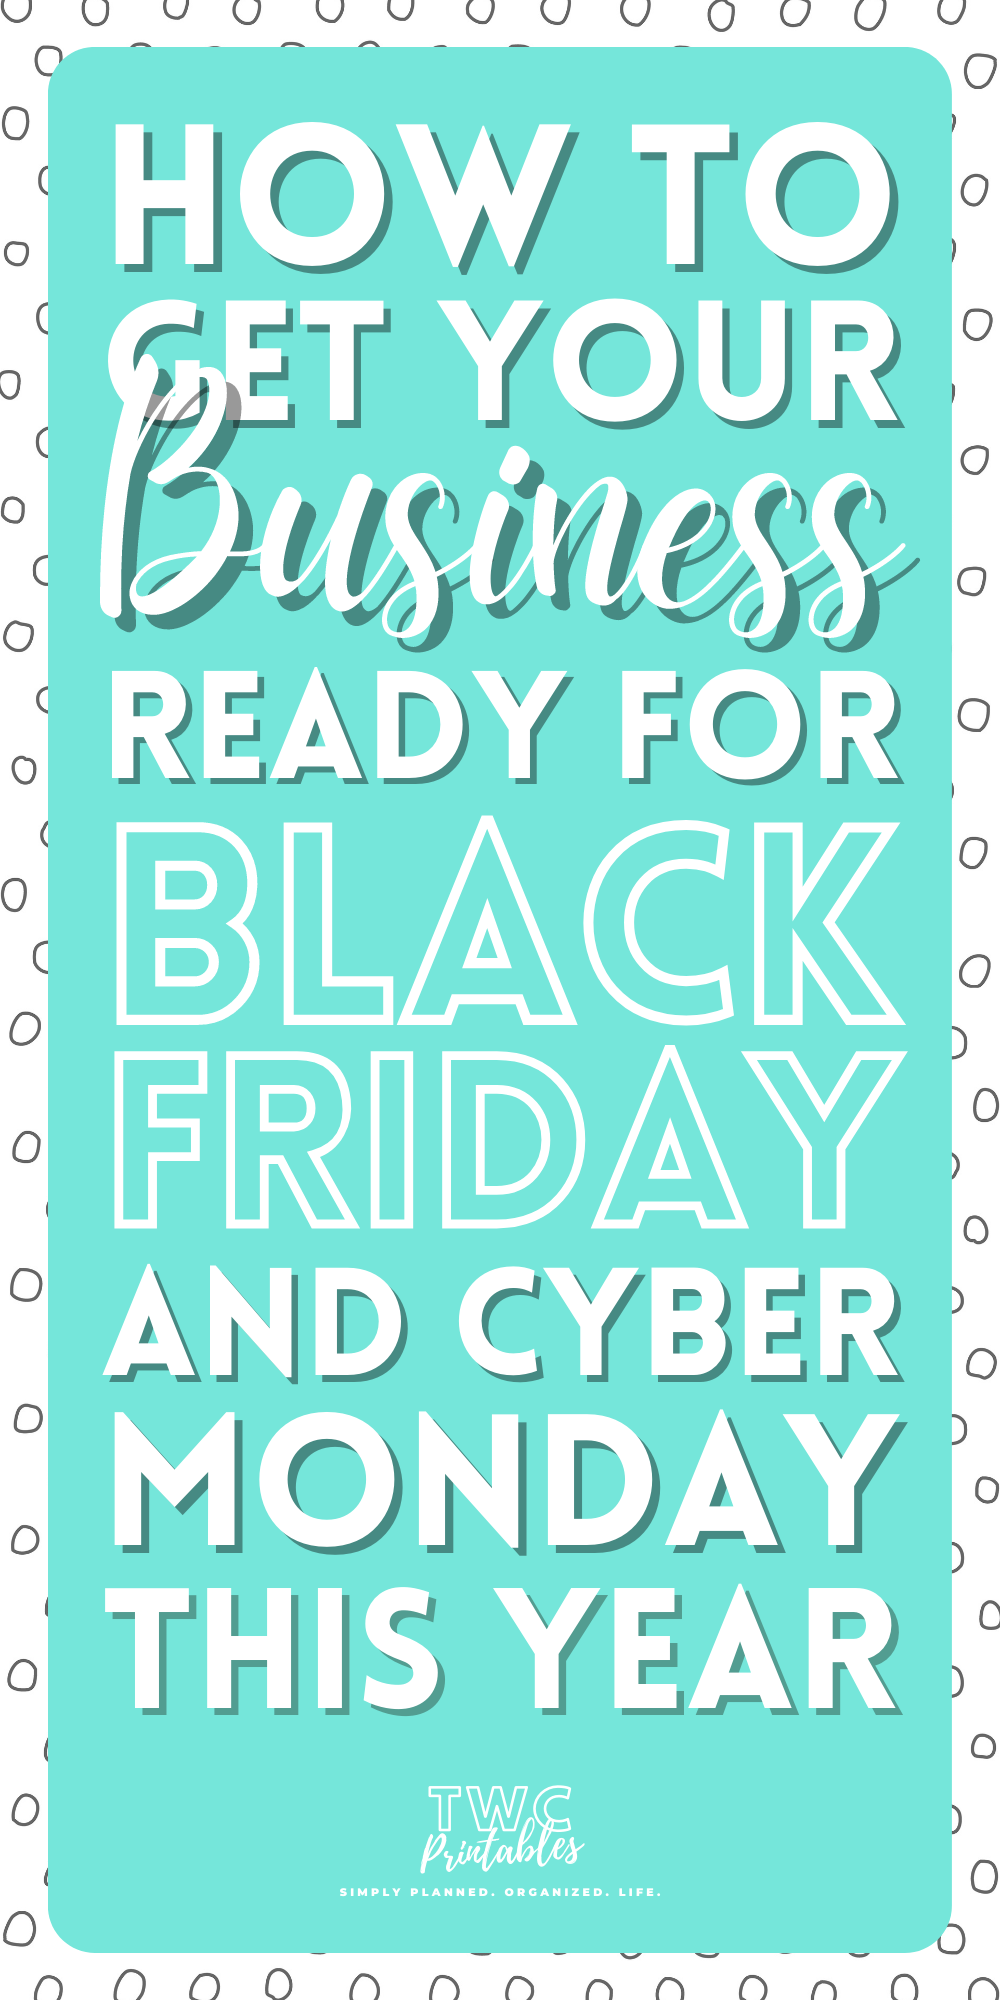 How to get your Business ready for Black Friday & Cyber Week